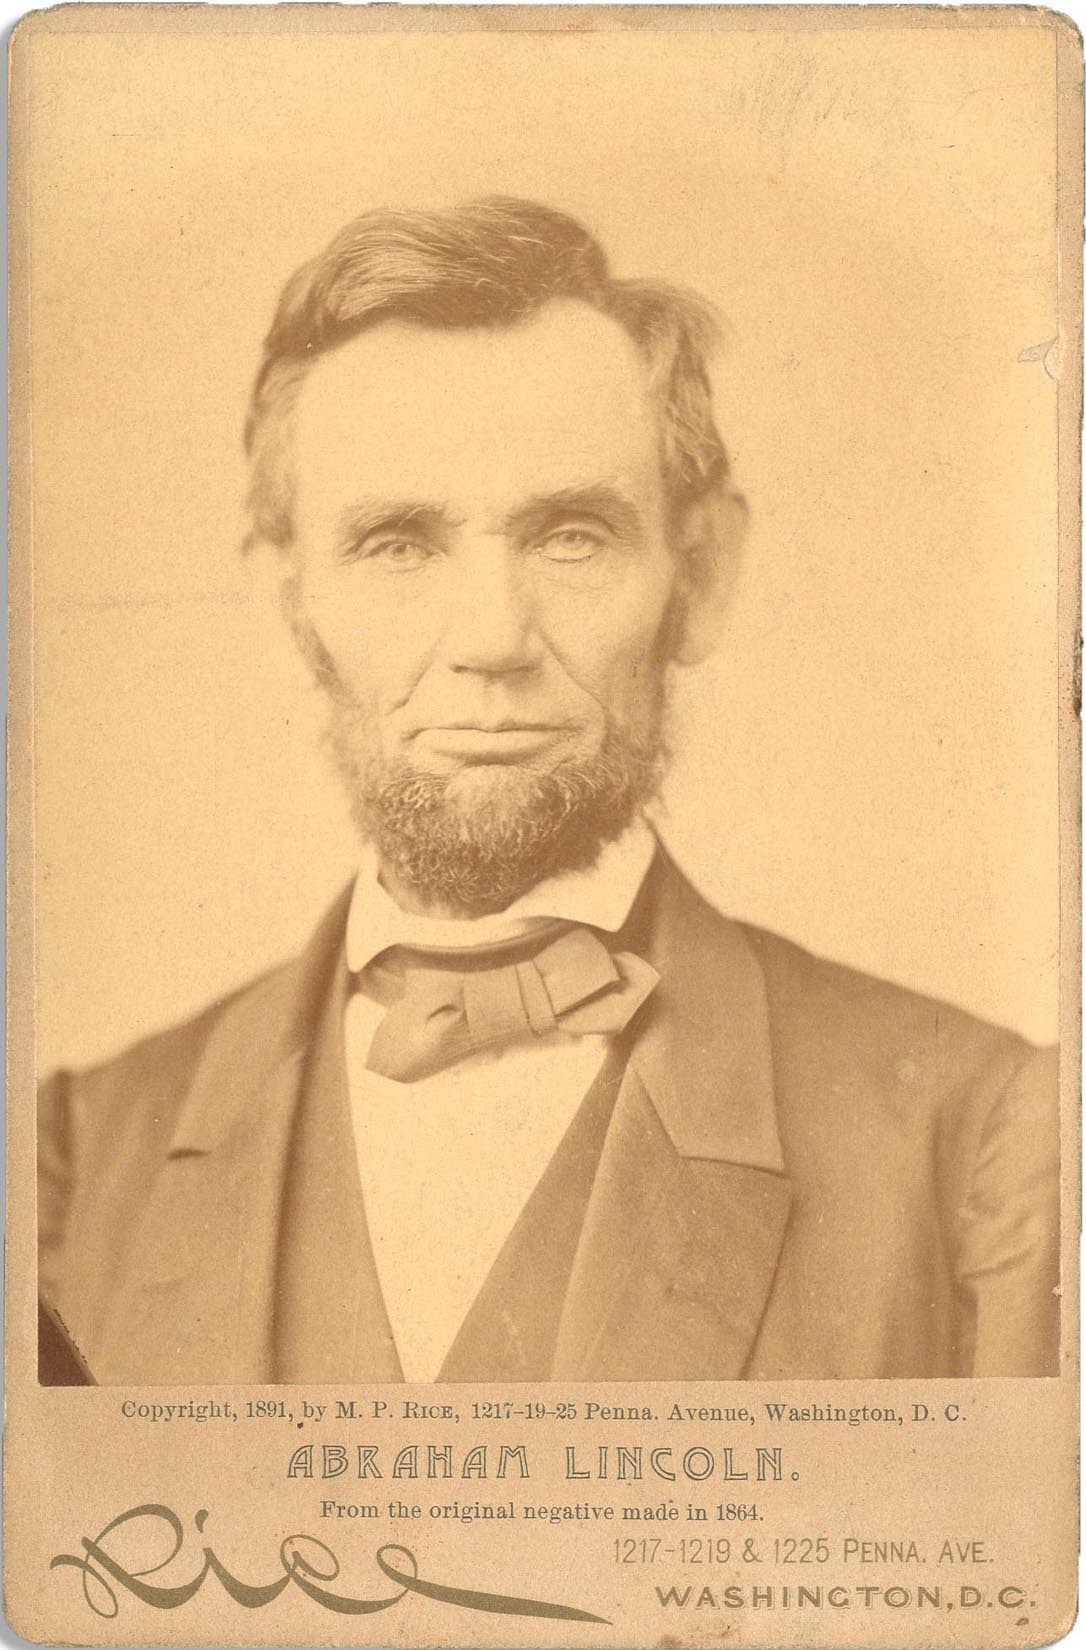 - 1891 Abraham Lincoln Cabinet Card by M.P. Rice